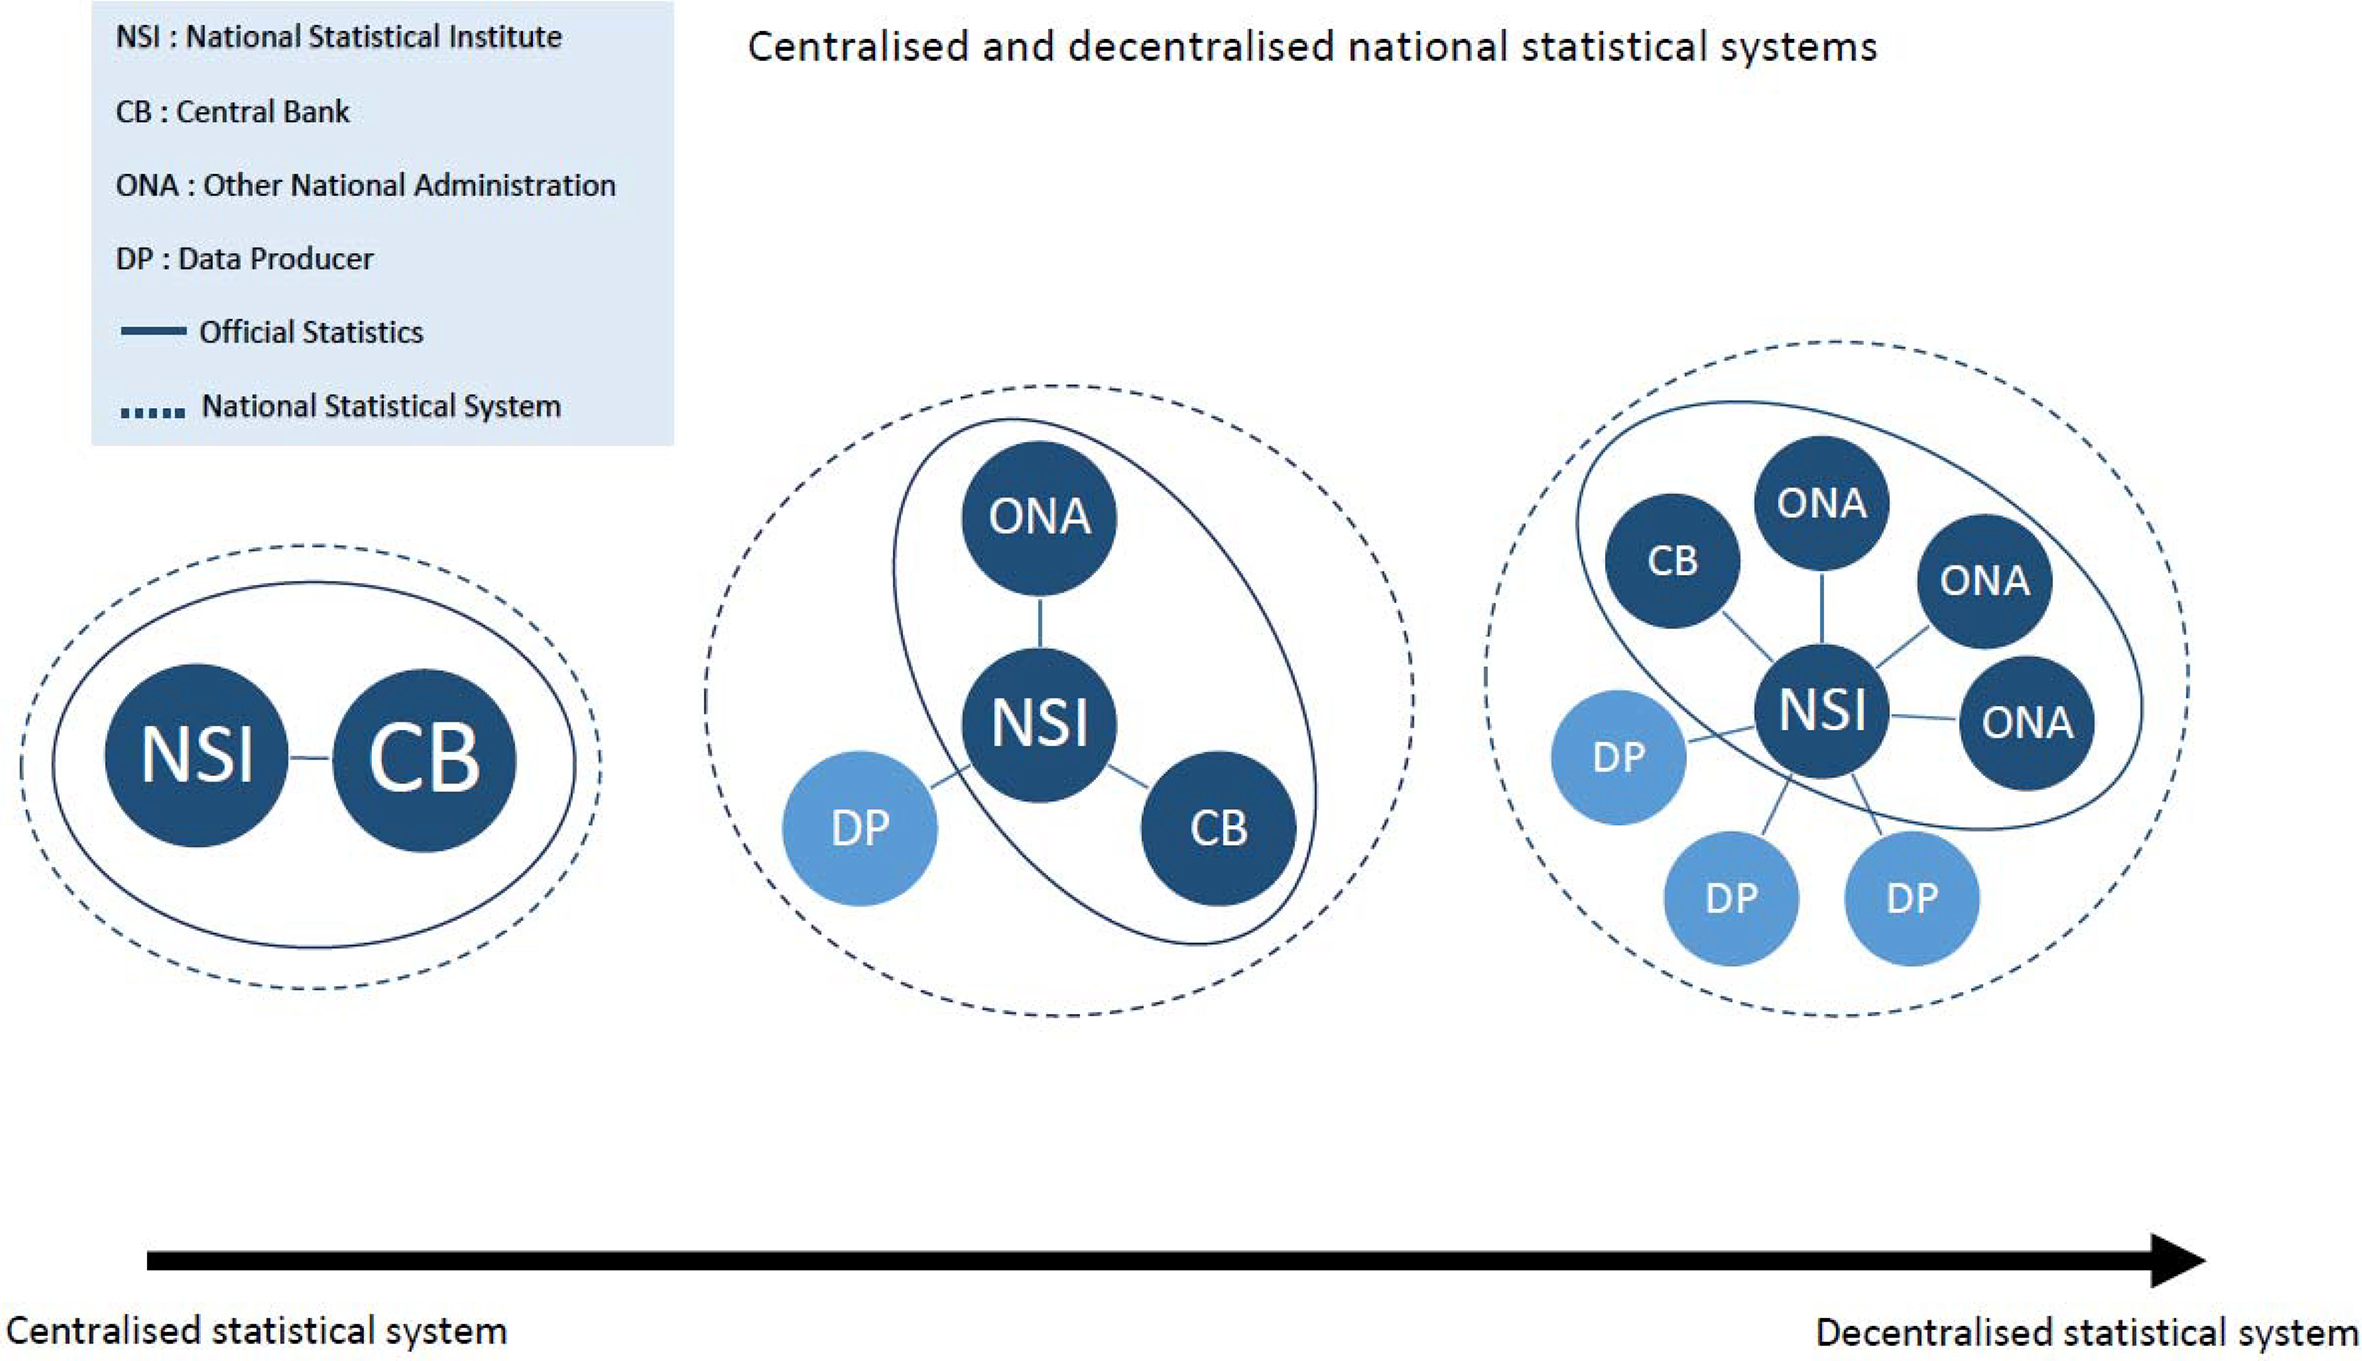 Continuum of the NSS from centralised to decentralised.